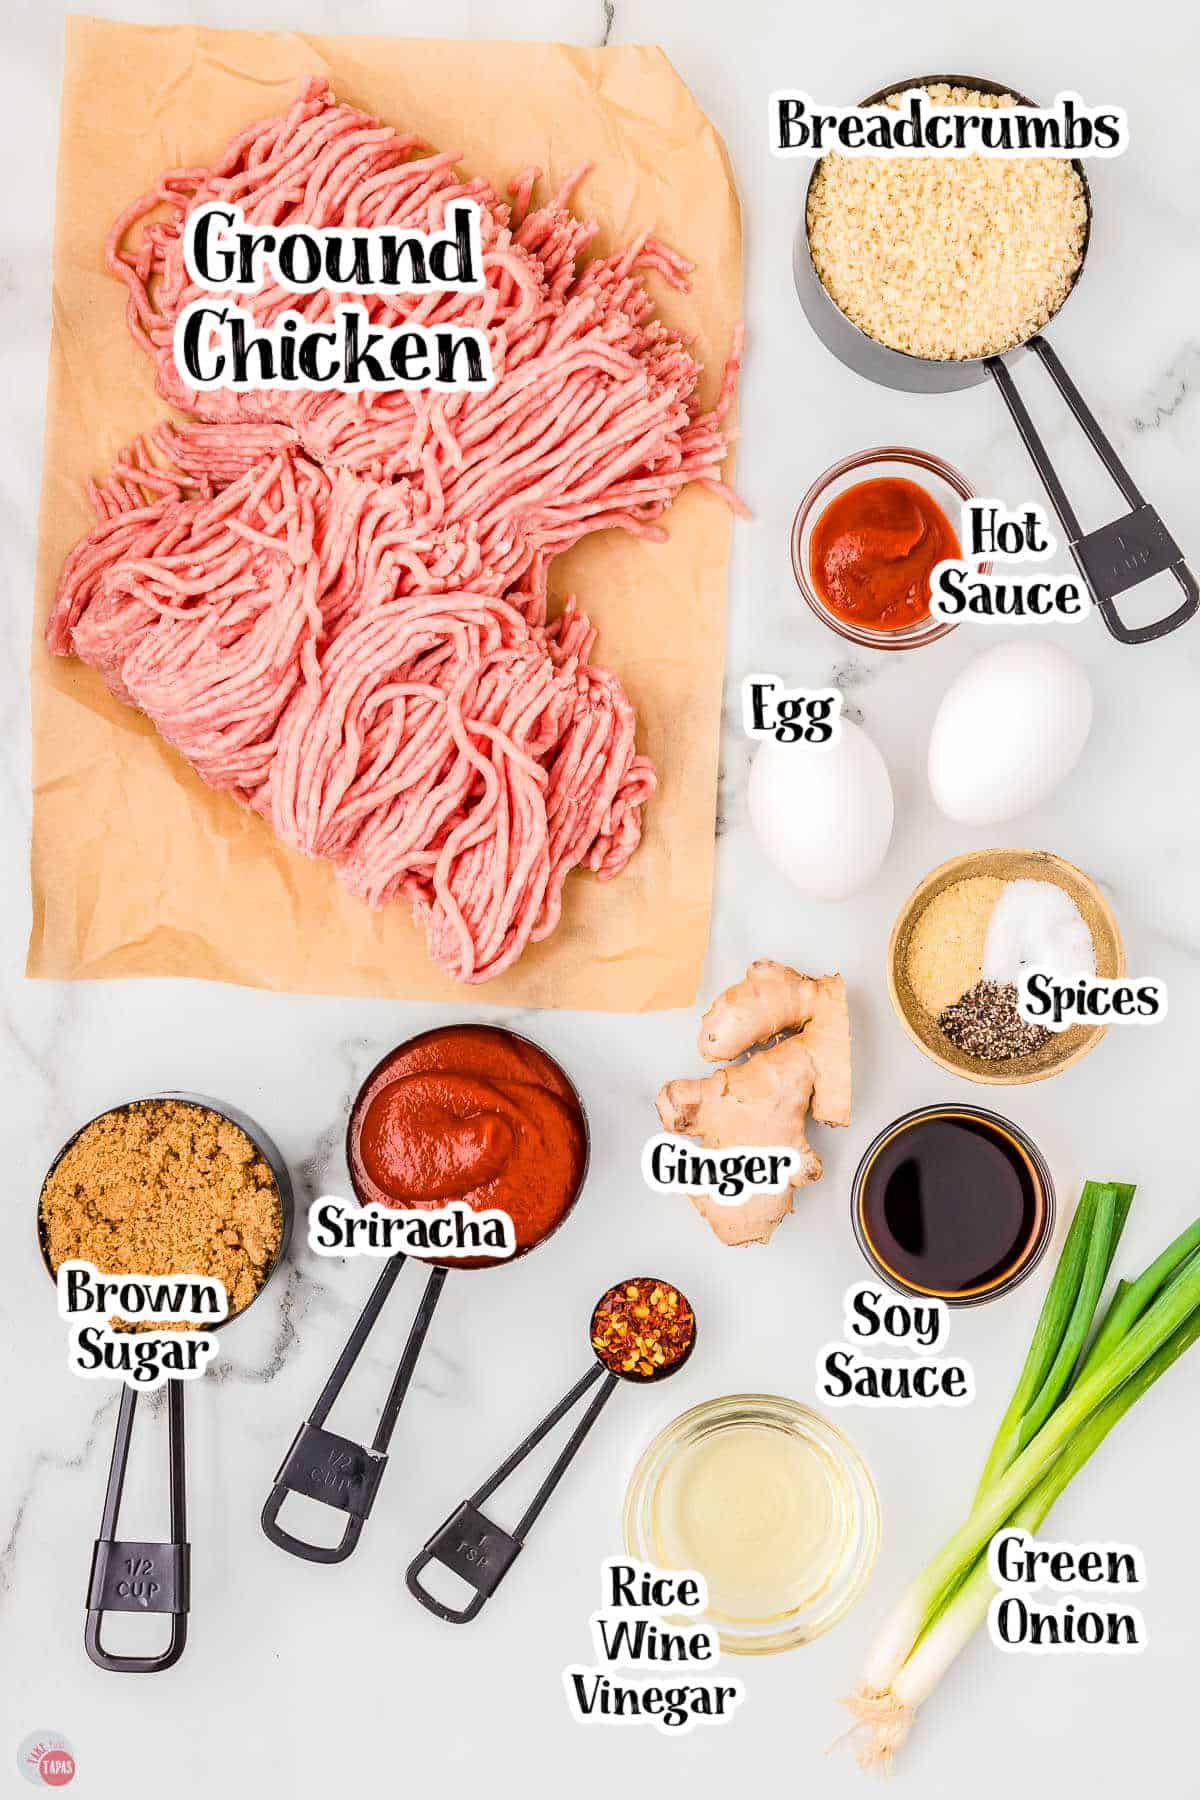 labeled picture of ingredients for firecracker meatball recipe with a pinch of salt on a plate